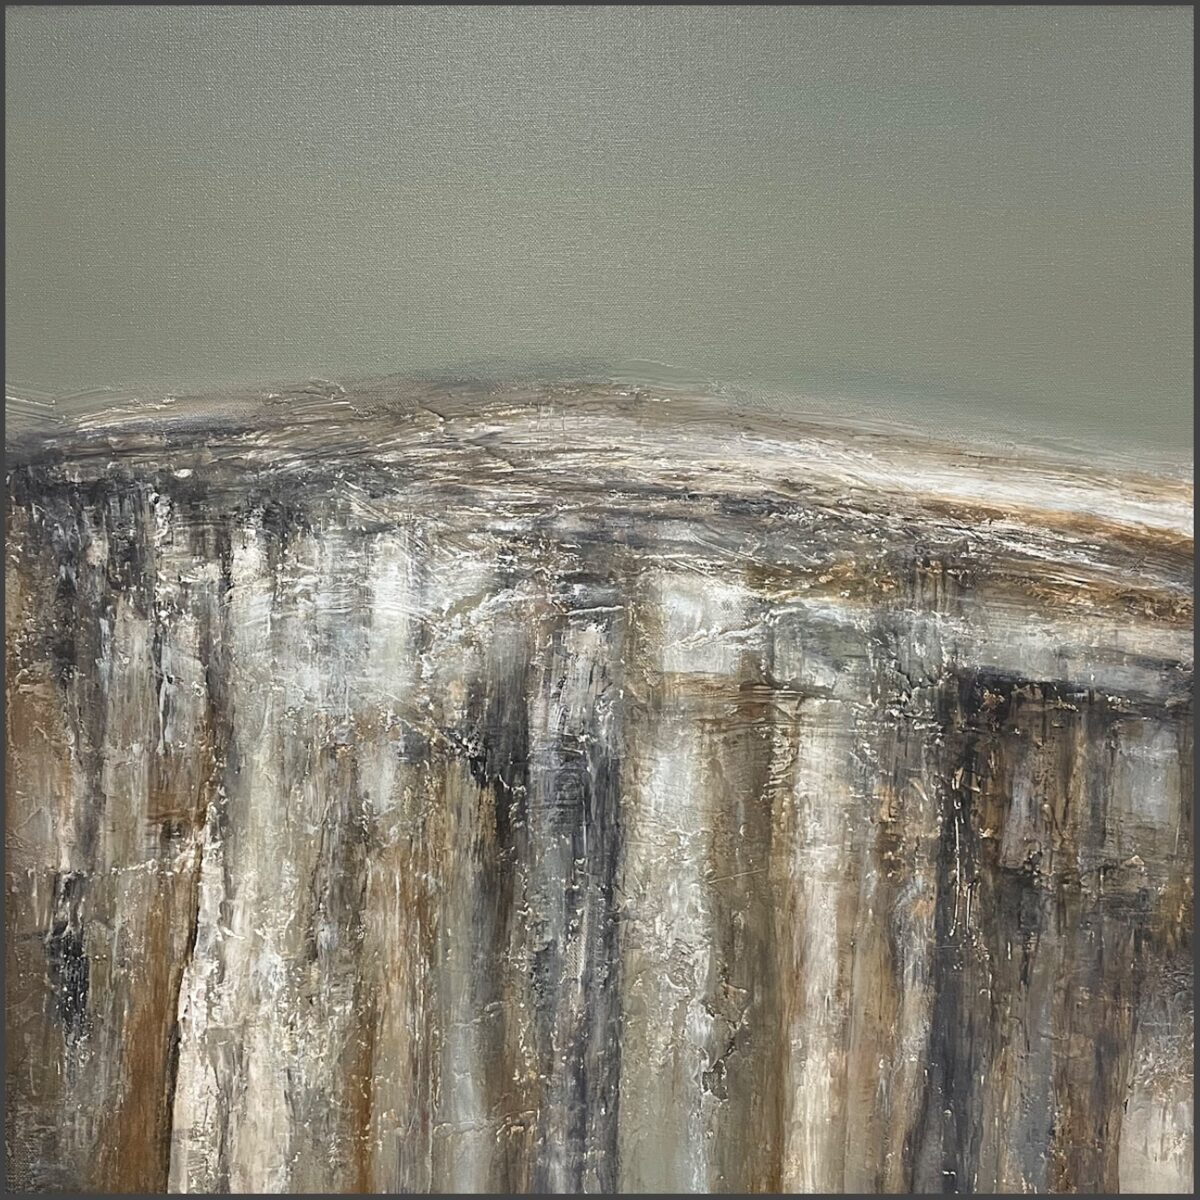 An abstract landscape painting in greys, browns and blue., depicting a rugged mountain range, by Hannah Blackmore.